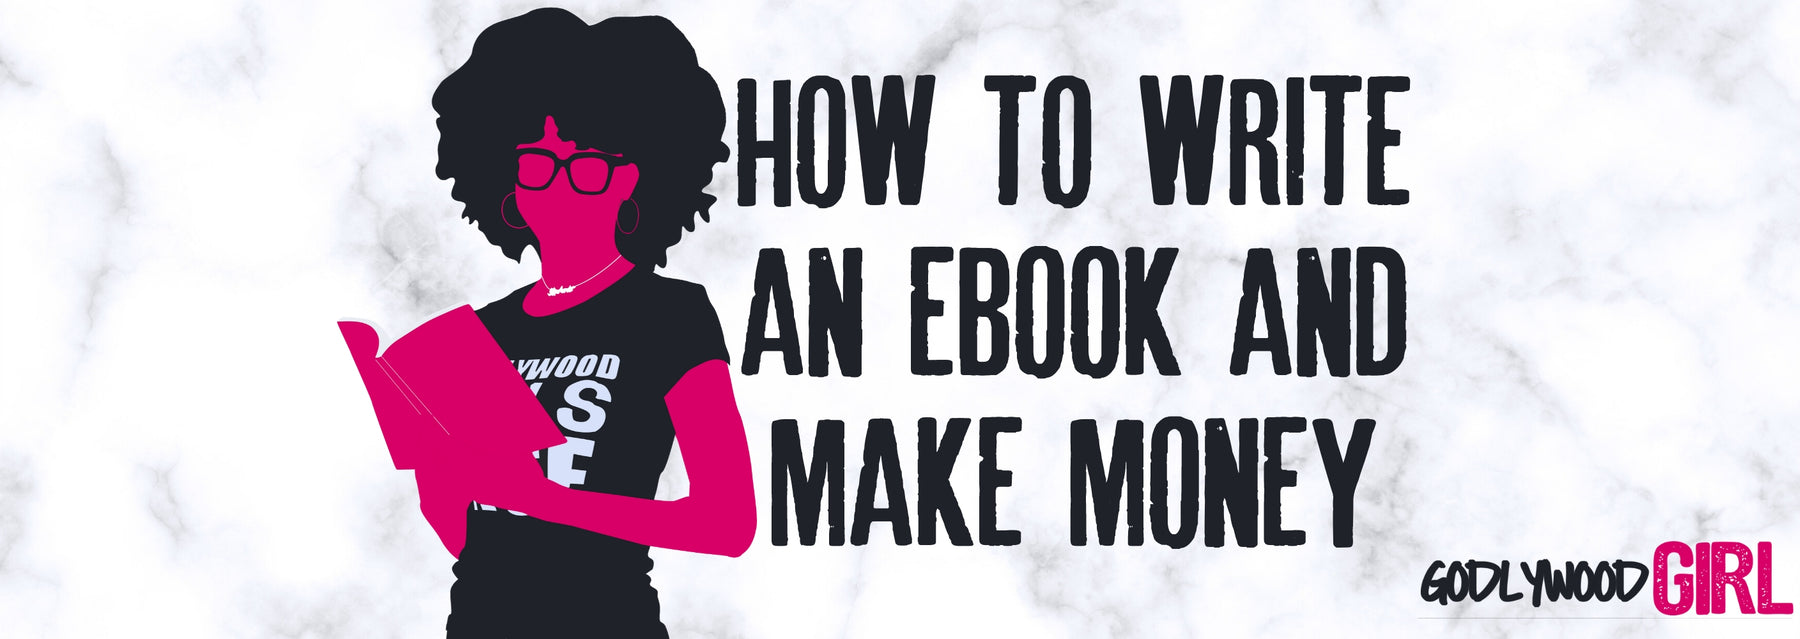 HOW TO WRITE AN EBOOK AND MAKE MONEY WITH A COACHING PROGRAM |How to Make Passive Income From Ebooks